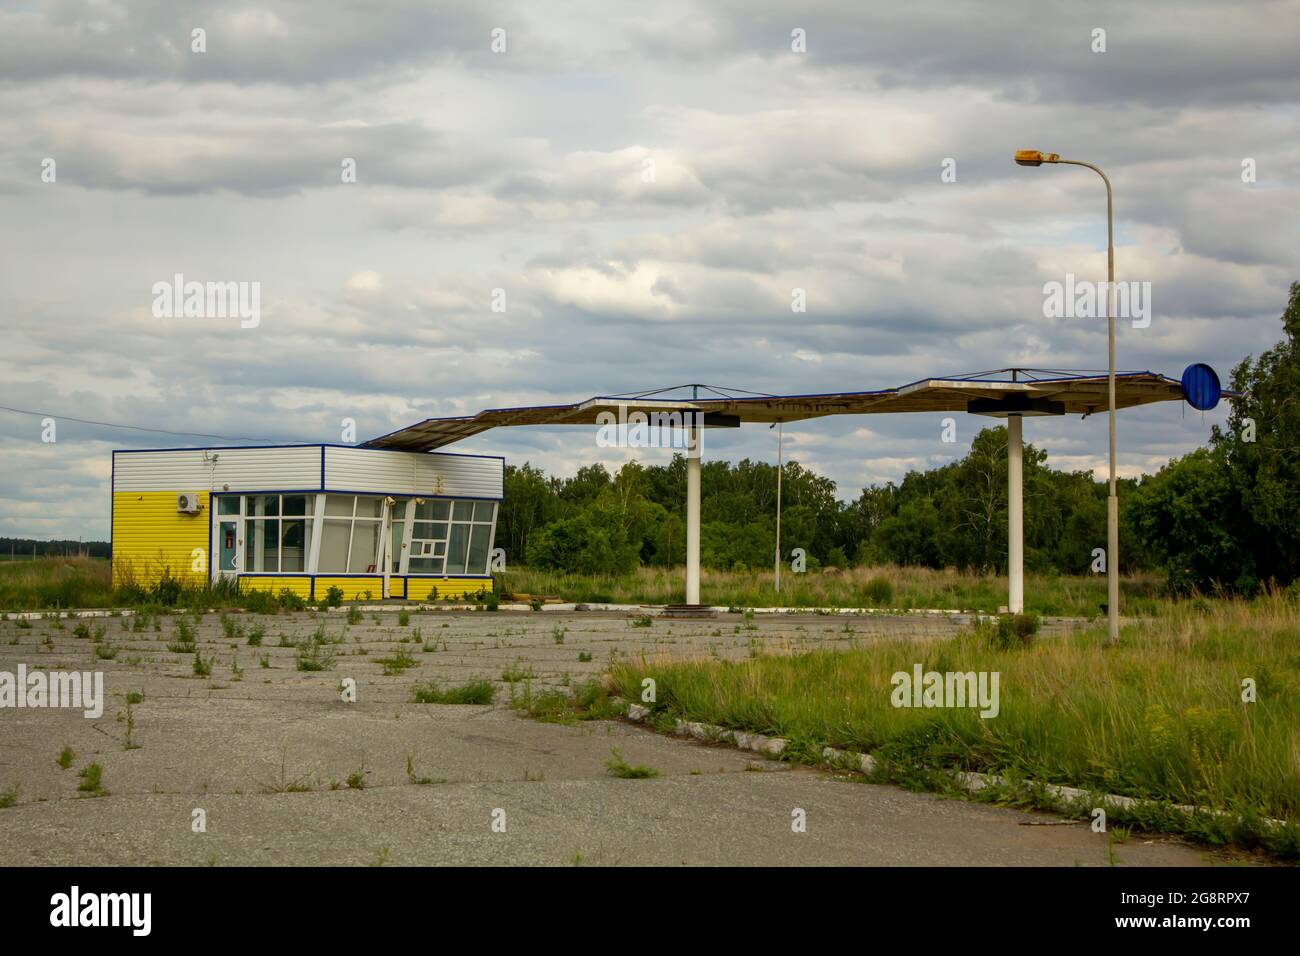 Abandoned gas station of a bankrupt small fuel company. Stock Photo